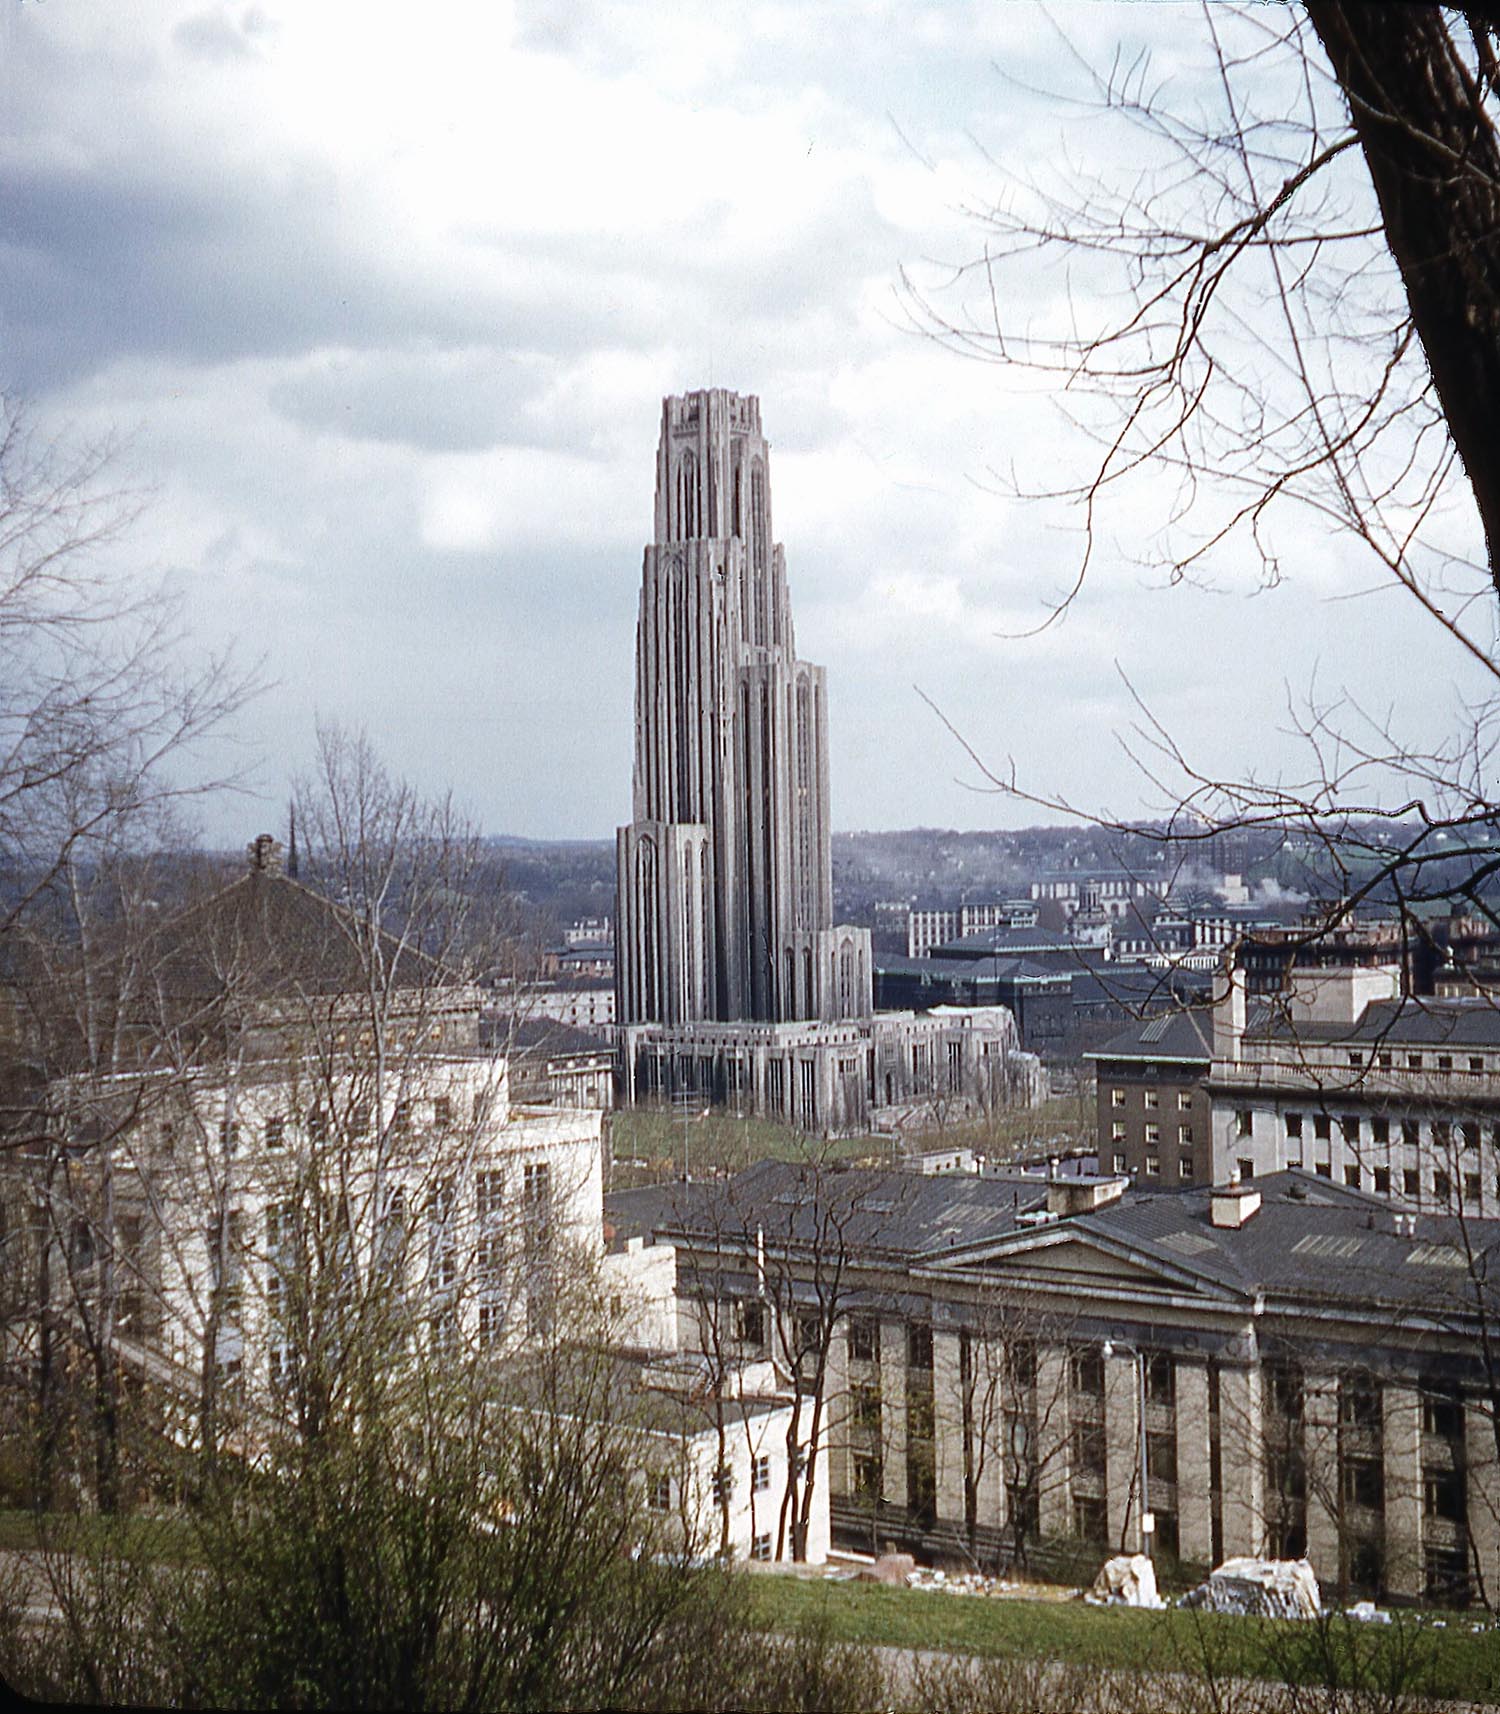 The University of Pittsburgh main campus in Pittsburgh, circa 1948. This is from a scan of a stereo slide taken by my grandfather Ralph E. Archer.  With no information on the slide it took some searching to determine what this structure was and where it was located. It was the most "alien" or out-of-place looking structure I had ever seen both with its unusual design and much greater height (42 stories, 535 feet tall) than everything surrounding it.
 
Known as the Cathedral of Learning this Late Gothic revival is the tallest educational building in the western hemisphere and the second tallest gothic style building in the world.  Commissioned in 1921 and dedicated in 1937 it is a steel frame structure overlain with Indiana limestone and contains more than 2,000 rooms and windows.

During WWII the cathedral was assigned to house, feed and instruct about 1,000 Army Air Corps as well as dozens of Army engineers. As my father, Ralph H. Archer served in the Army Air Corps during WWII this may be the reason for this particular photo in his father's collection and so may date somewhat earlier than 1948.
 